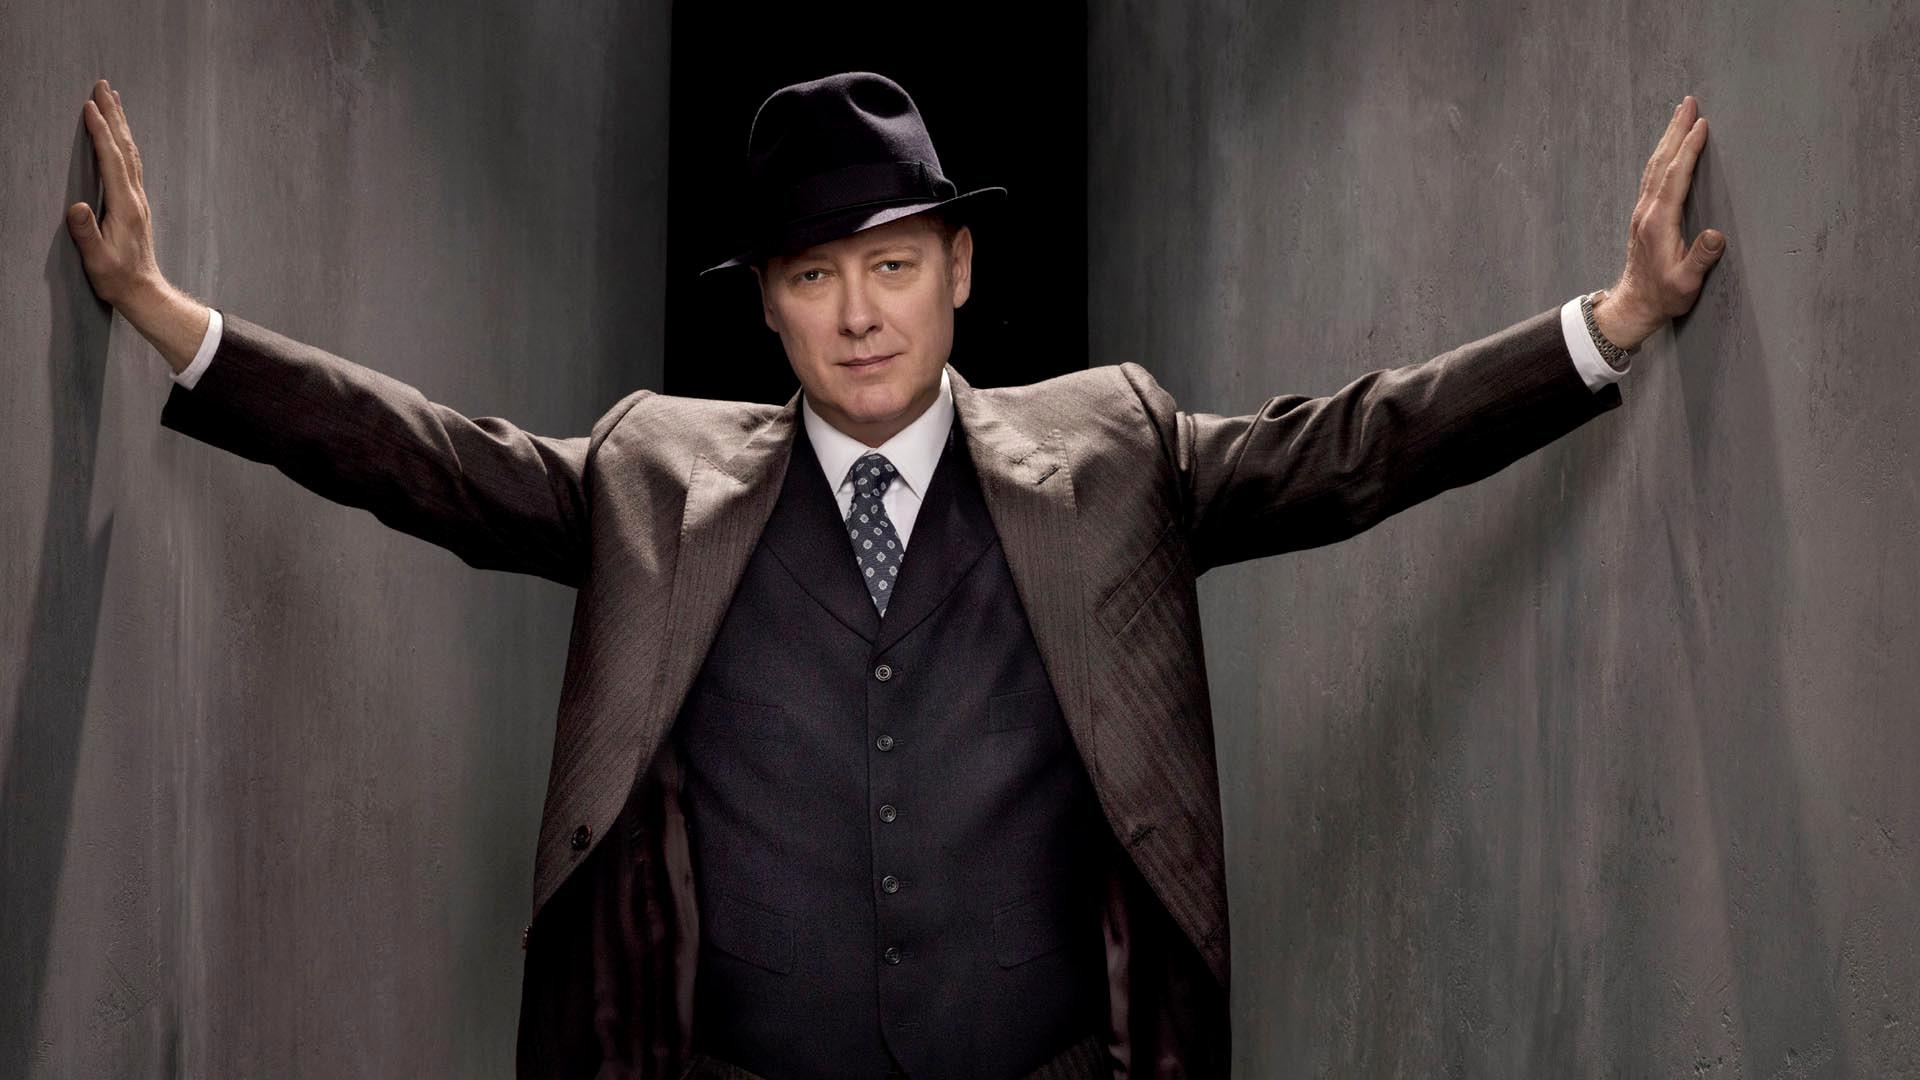 The Blacklist Wallpaper background picture